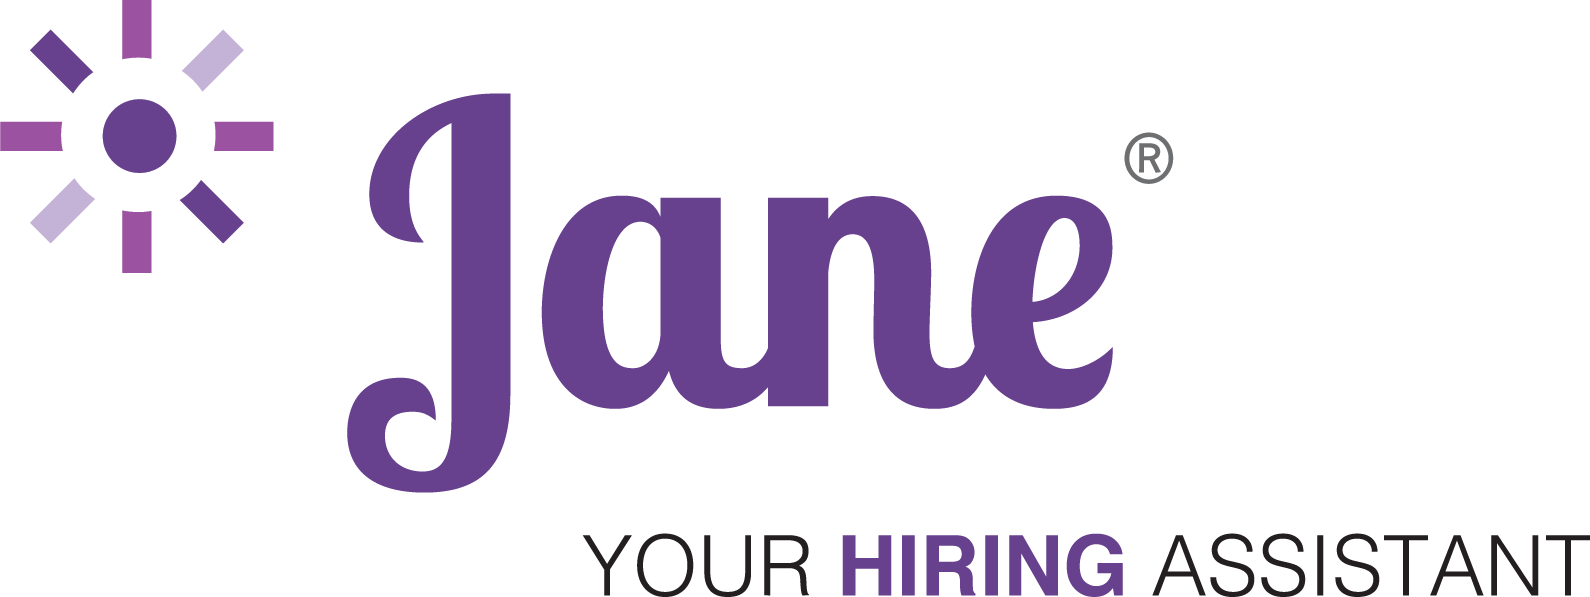 Jane, your hiring assistant logo